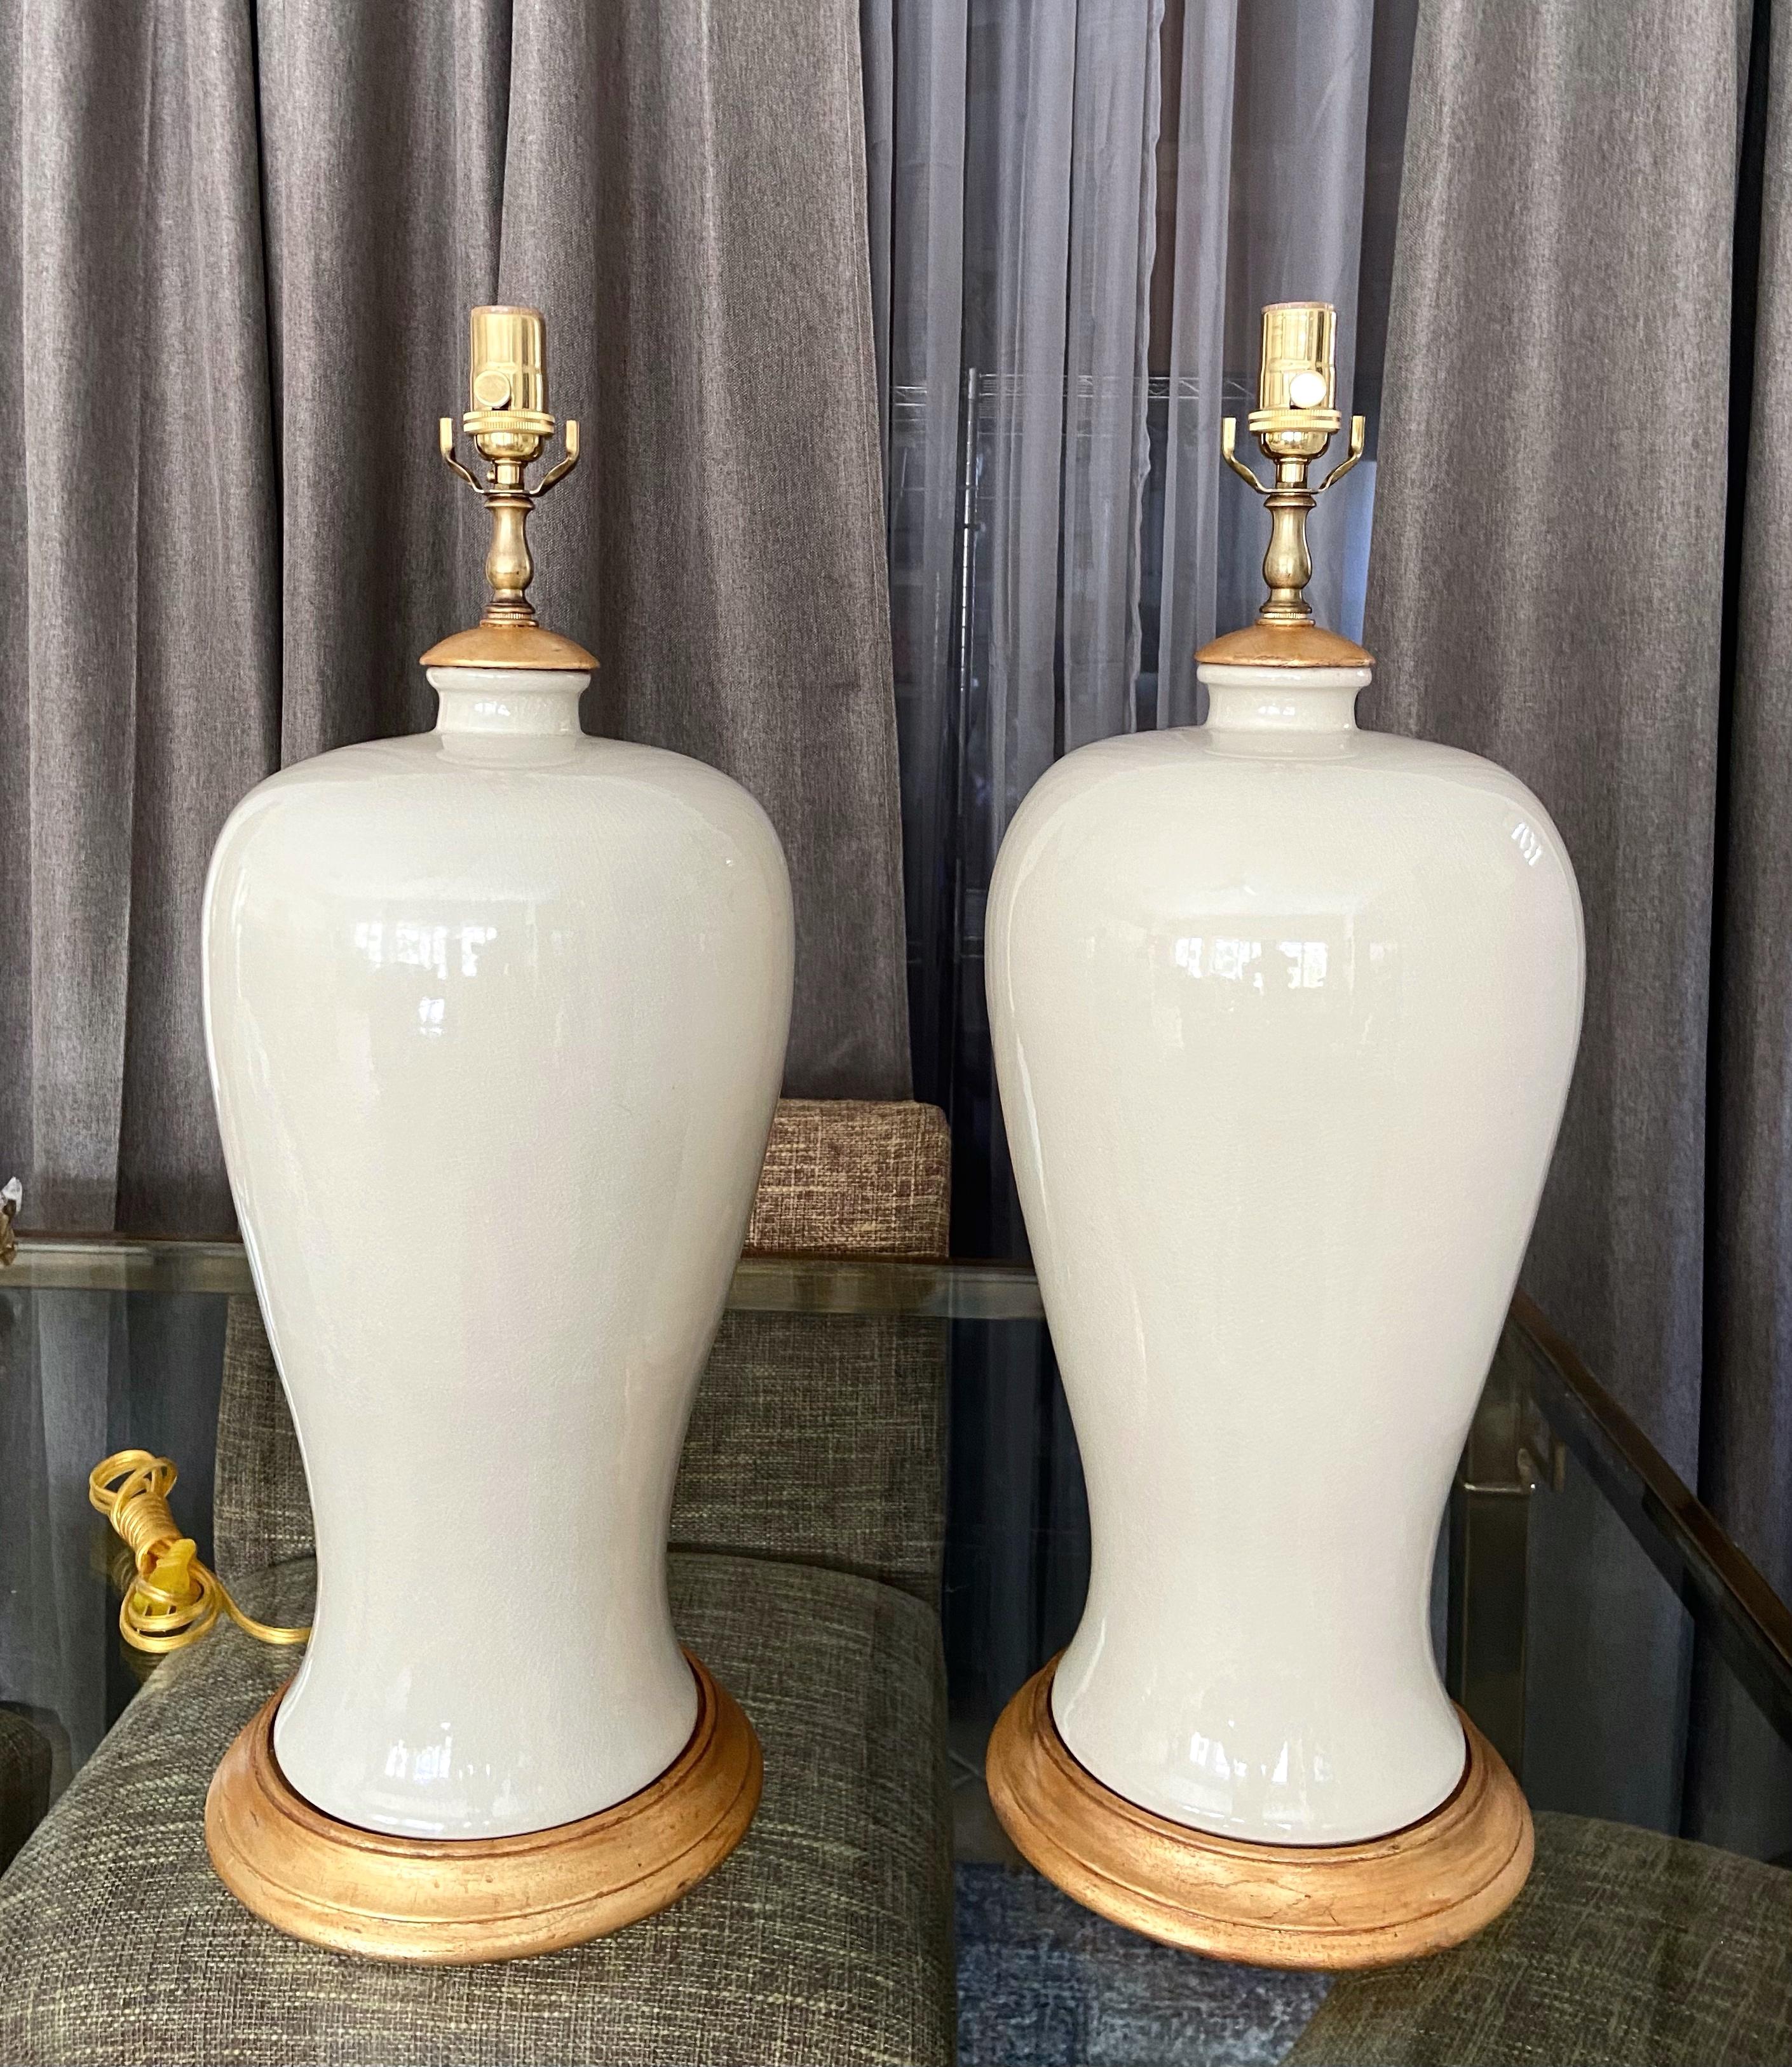 Pair of large Japanese Asian blanc de shine monochrome plume shaped porcelain vase table lamps. Mounted on turned giltwood bases with matching v-caps. The color of the porcelain is a rich creamy white with tinge of green depending on light source.